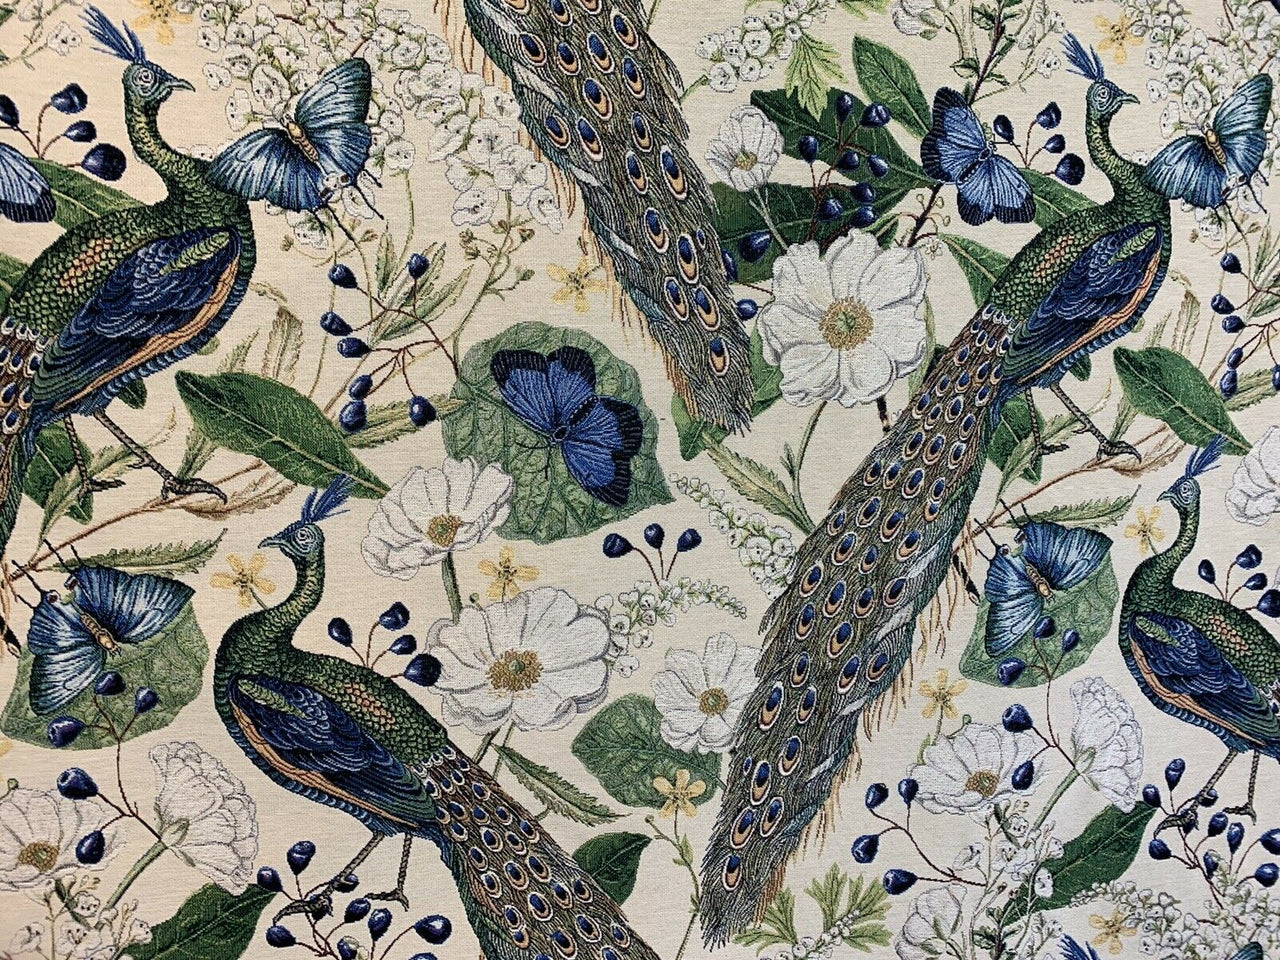 Peacock Butterflies Birds Botanical Woven Fabric Sold by Meter Floral Upholstery Textile Beige Sewing Material